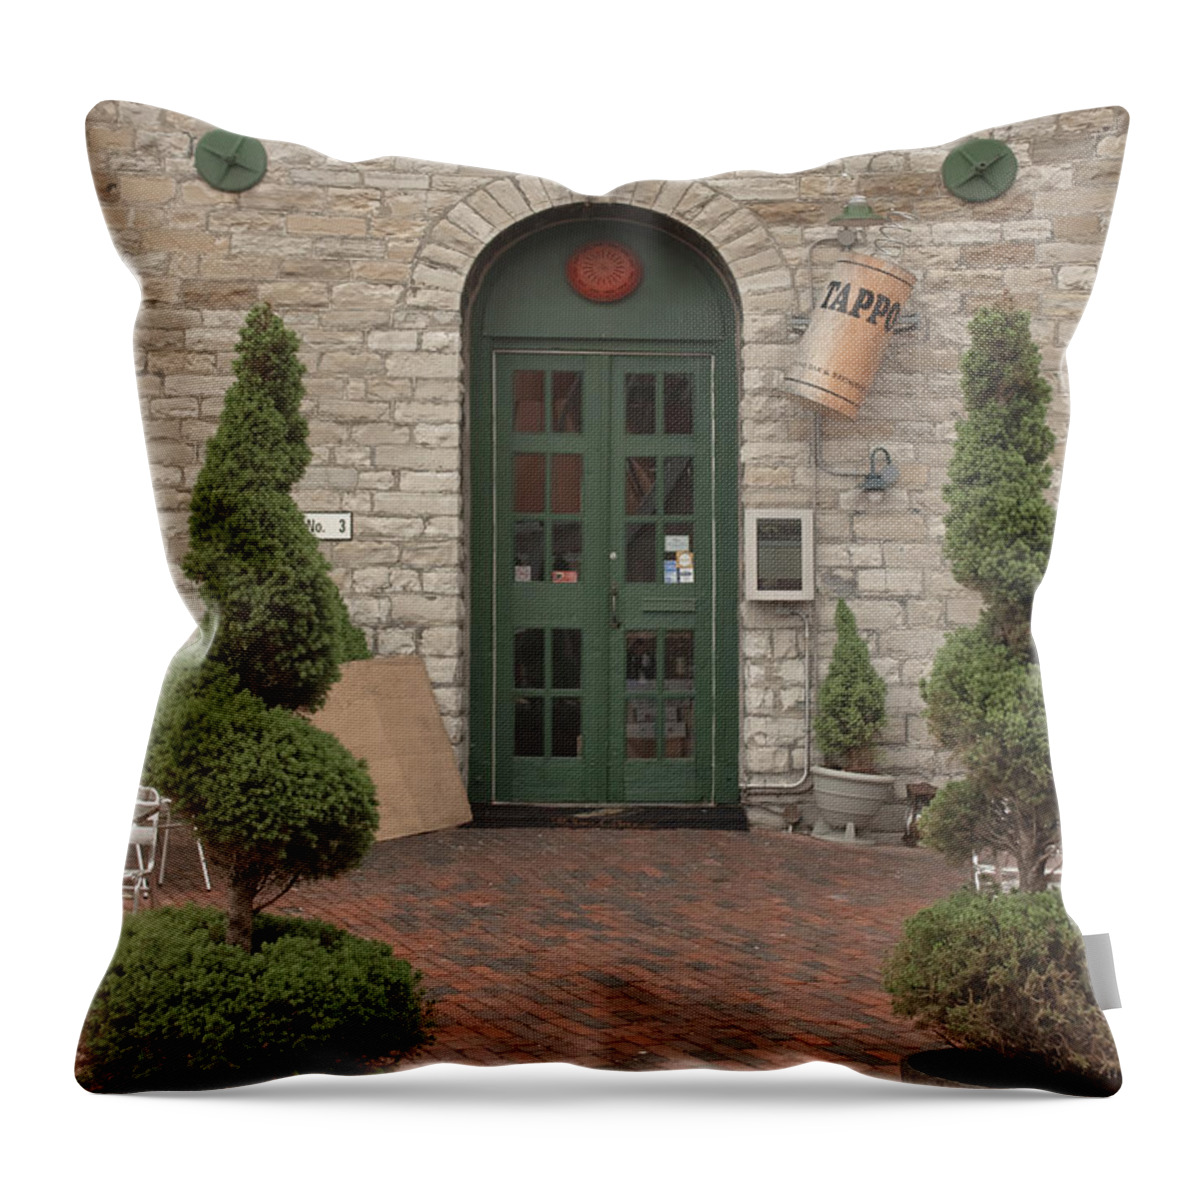 Art District Throw Pillow featuring the photograph Tappo Or Not Tappo by Hany J